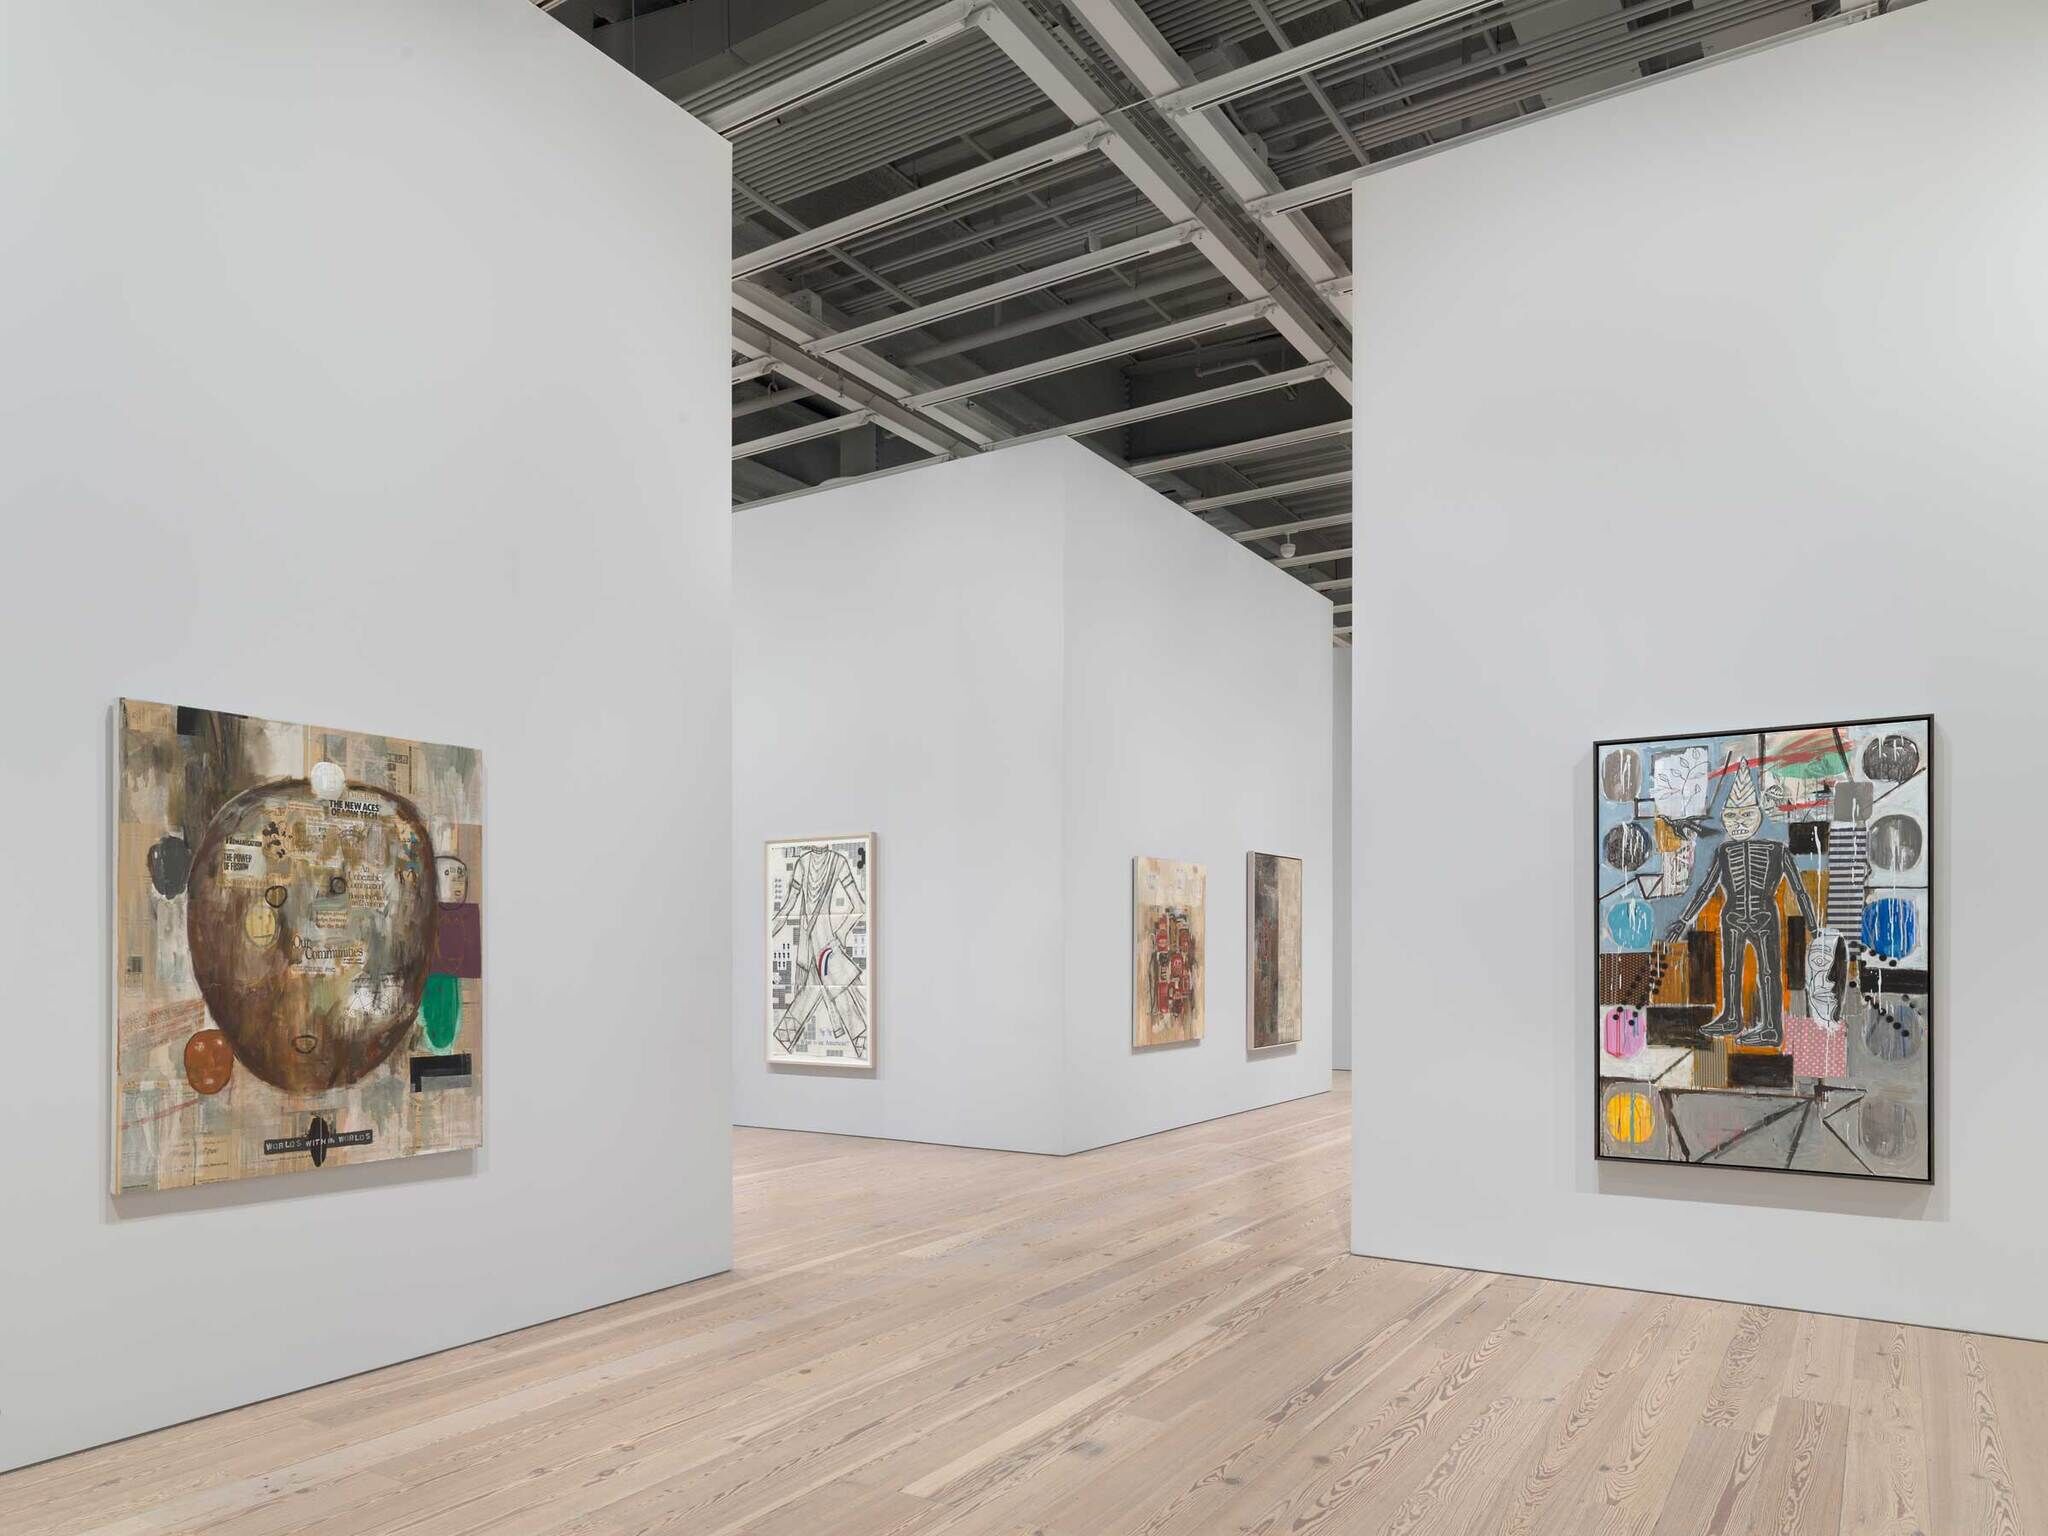 In the background, three beige colored paintings on different walls, and in the foreground on the left, a circular brown painting and on the right a figure with a skeleton surrounded by abstract shapes.